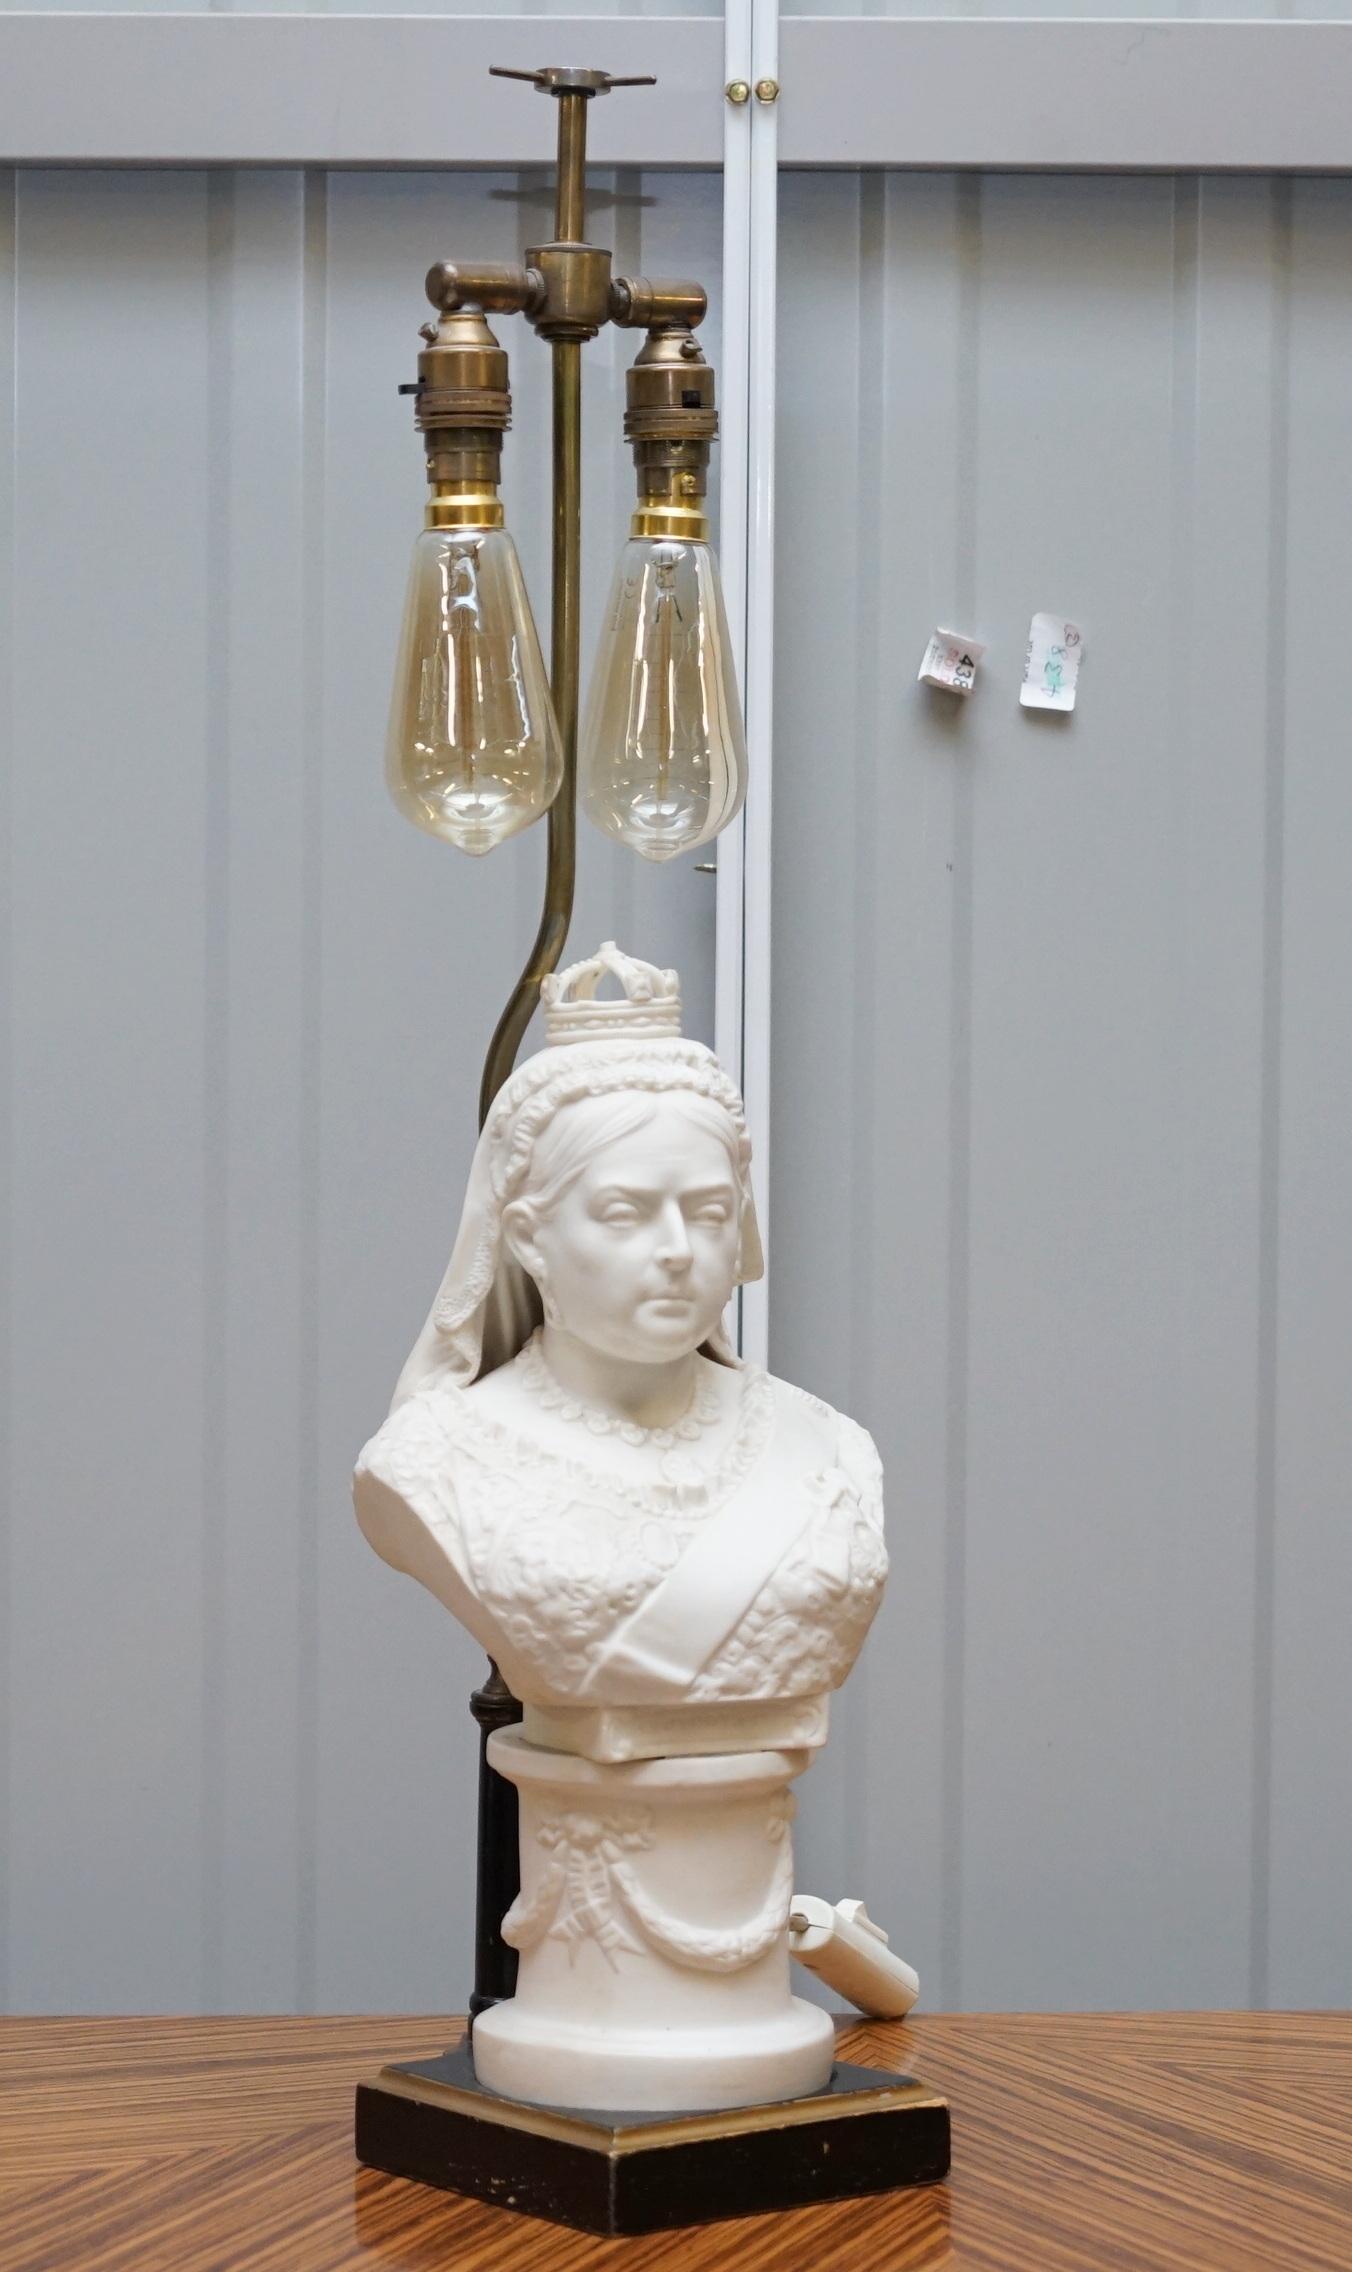 Wimbledon-Furniture

Wimbledon-Furniture is delighted to offer for sale this lovely 19th century Parian figured bust of Queen Victoria made into a table lamp

Please note the delivery fee listed is just a guide, it covers within the M25 only,